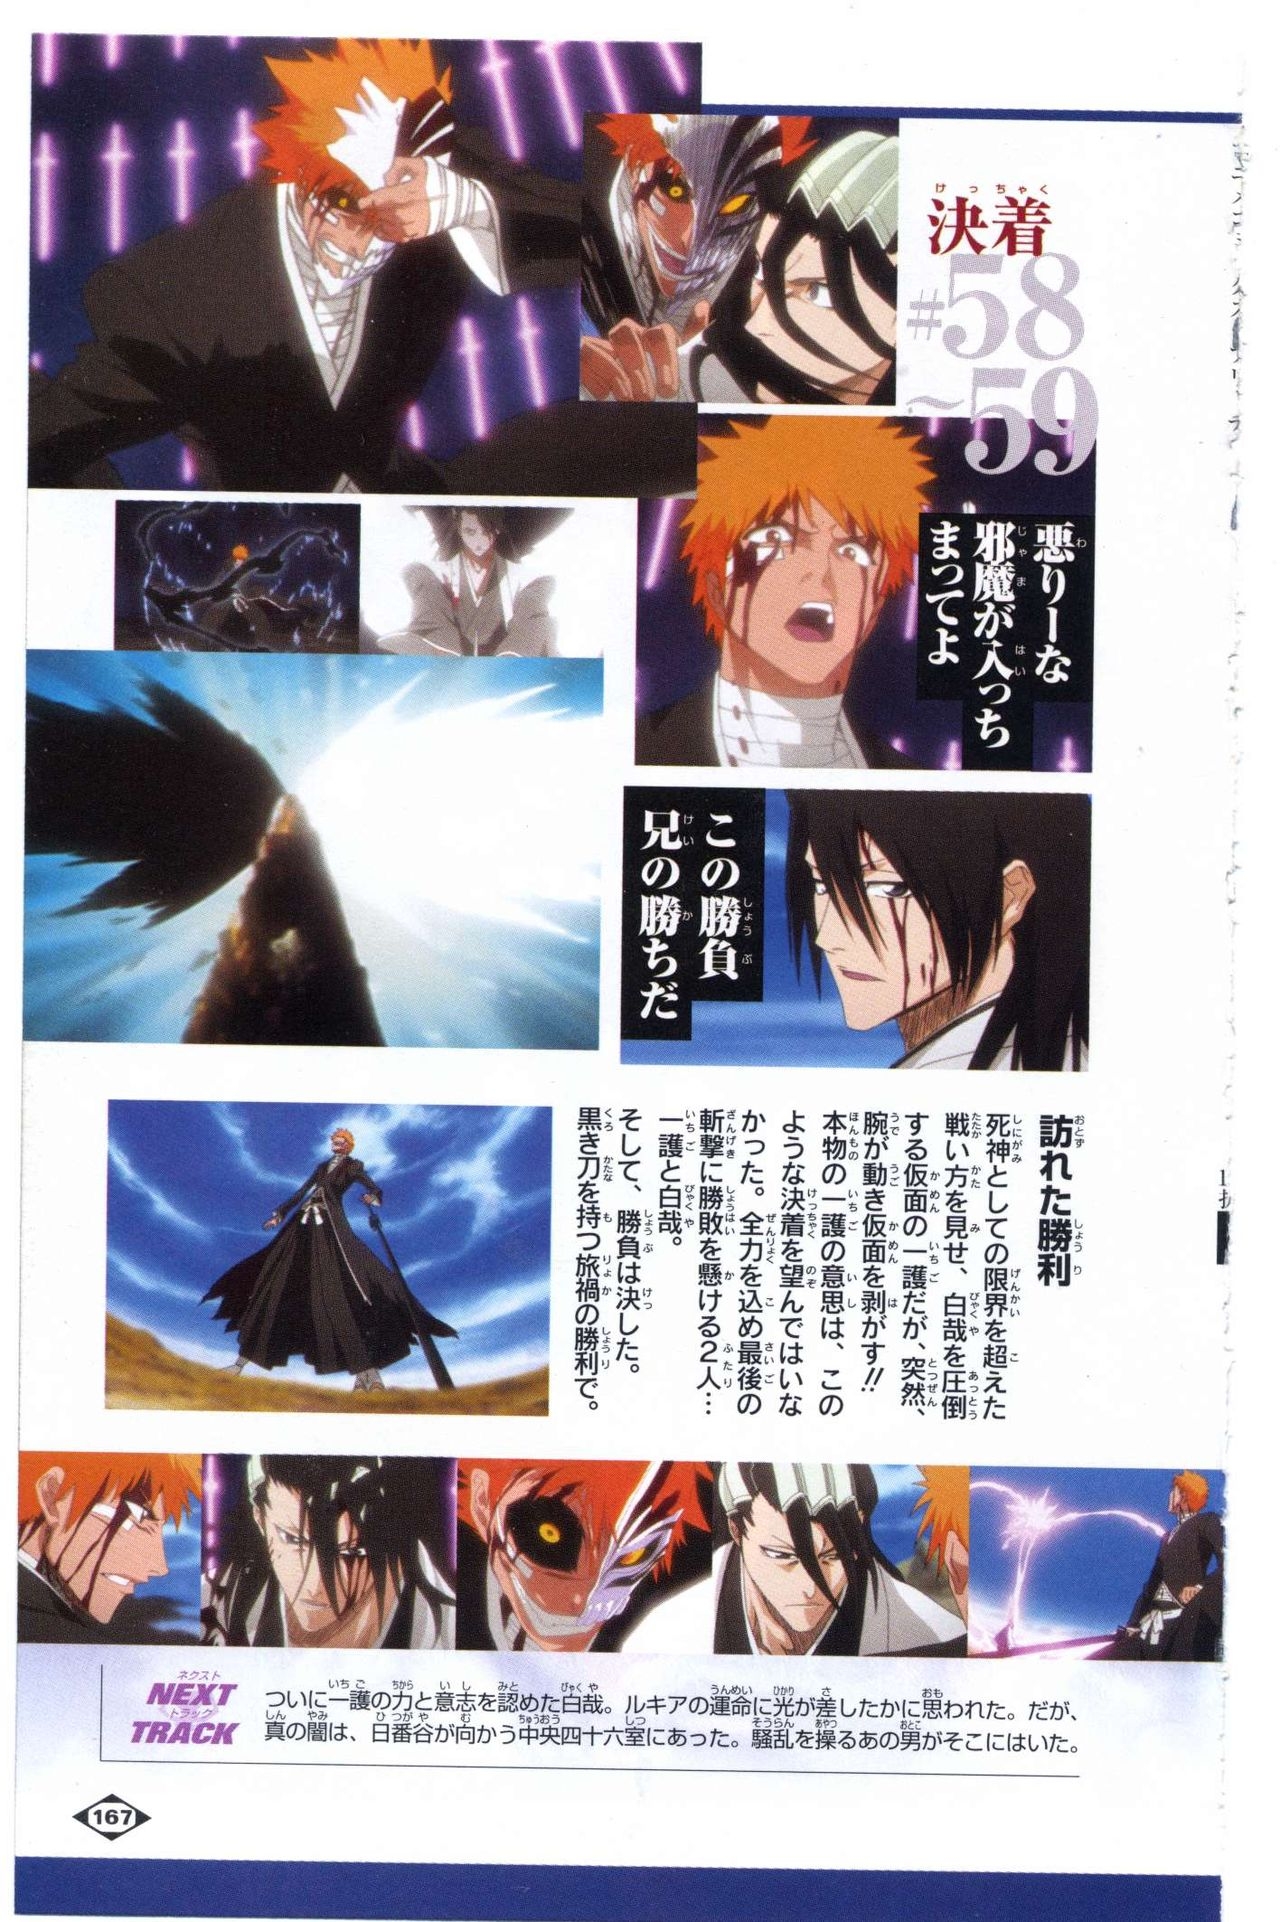 Bleach: Official Animation Book VIBEs 167